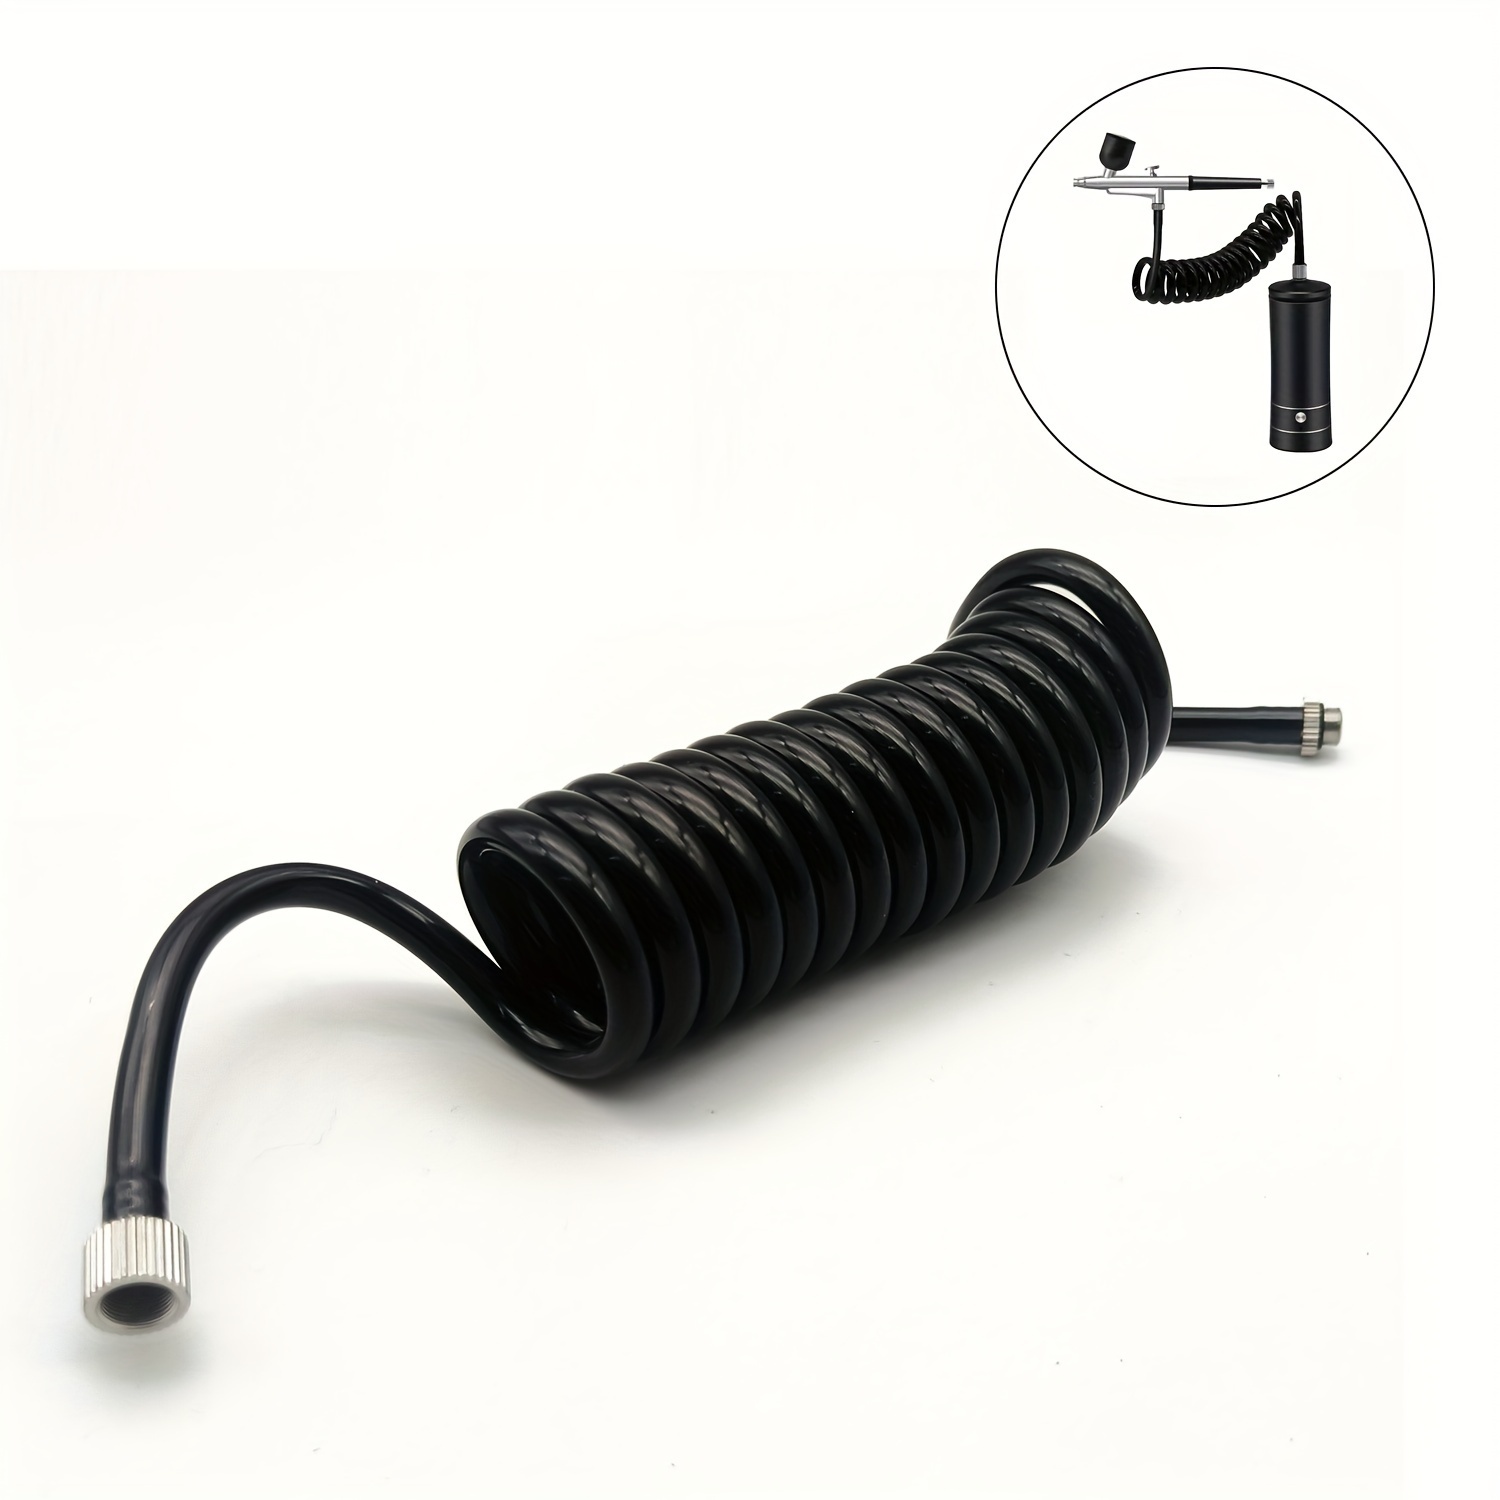 

Universal 180cm Spring Tube Air Hose With Connector - Durable Pu, Flexible & Lightweight For Versatile Air Tool With M7 Connector